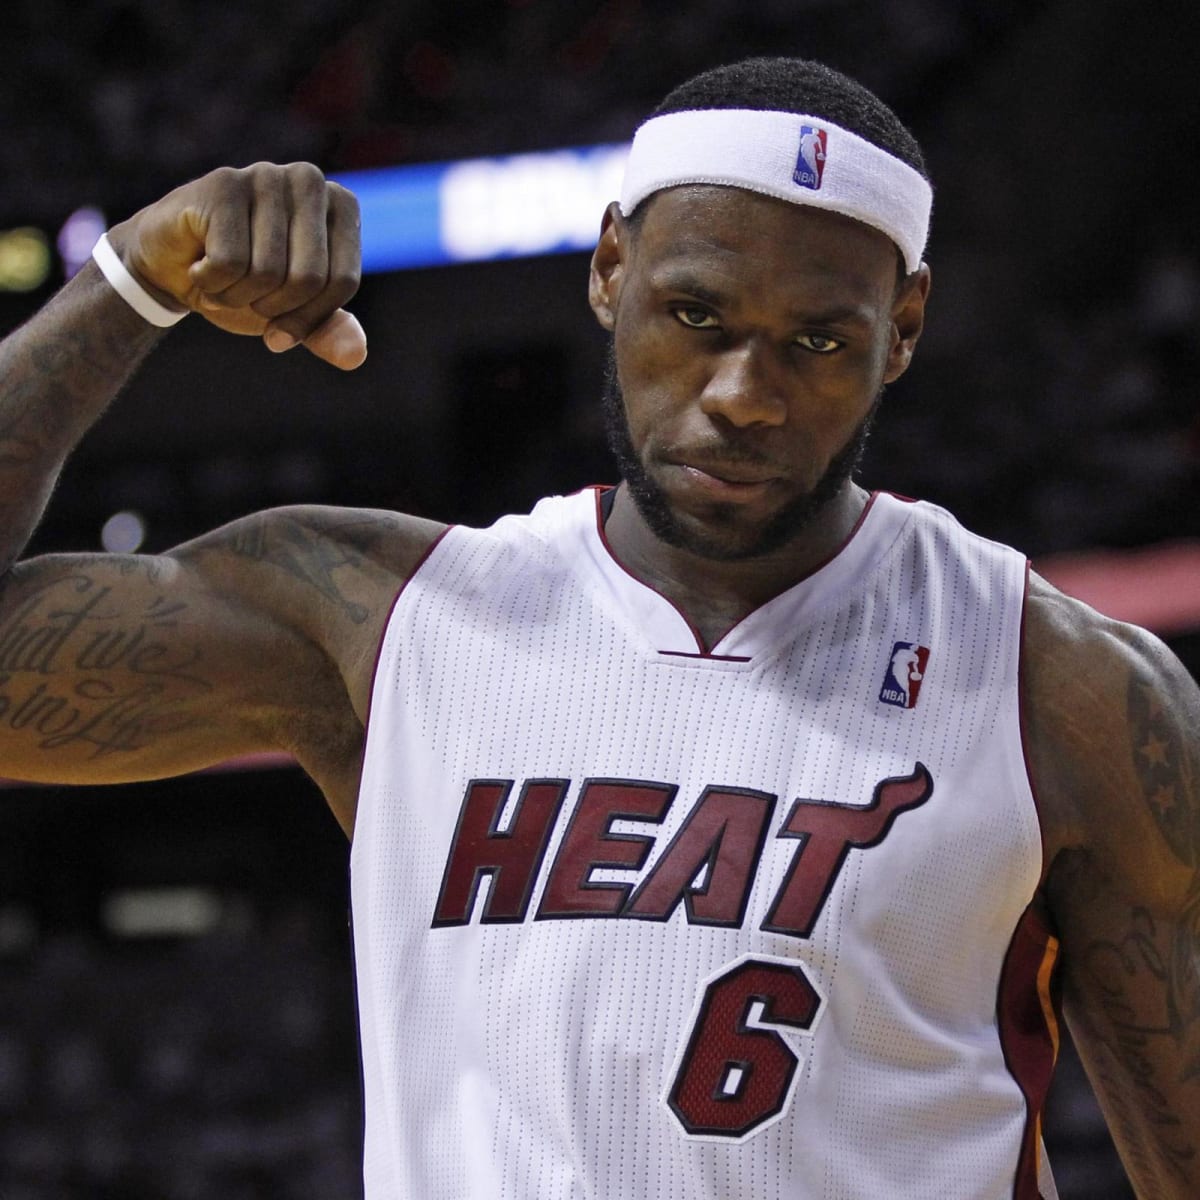 NBA: LeBron James changes jersey number for Space Jam release